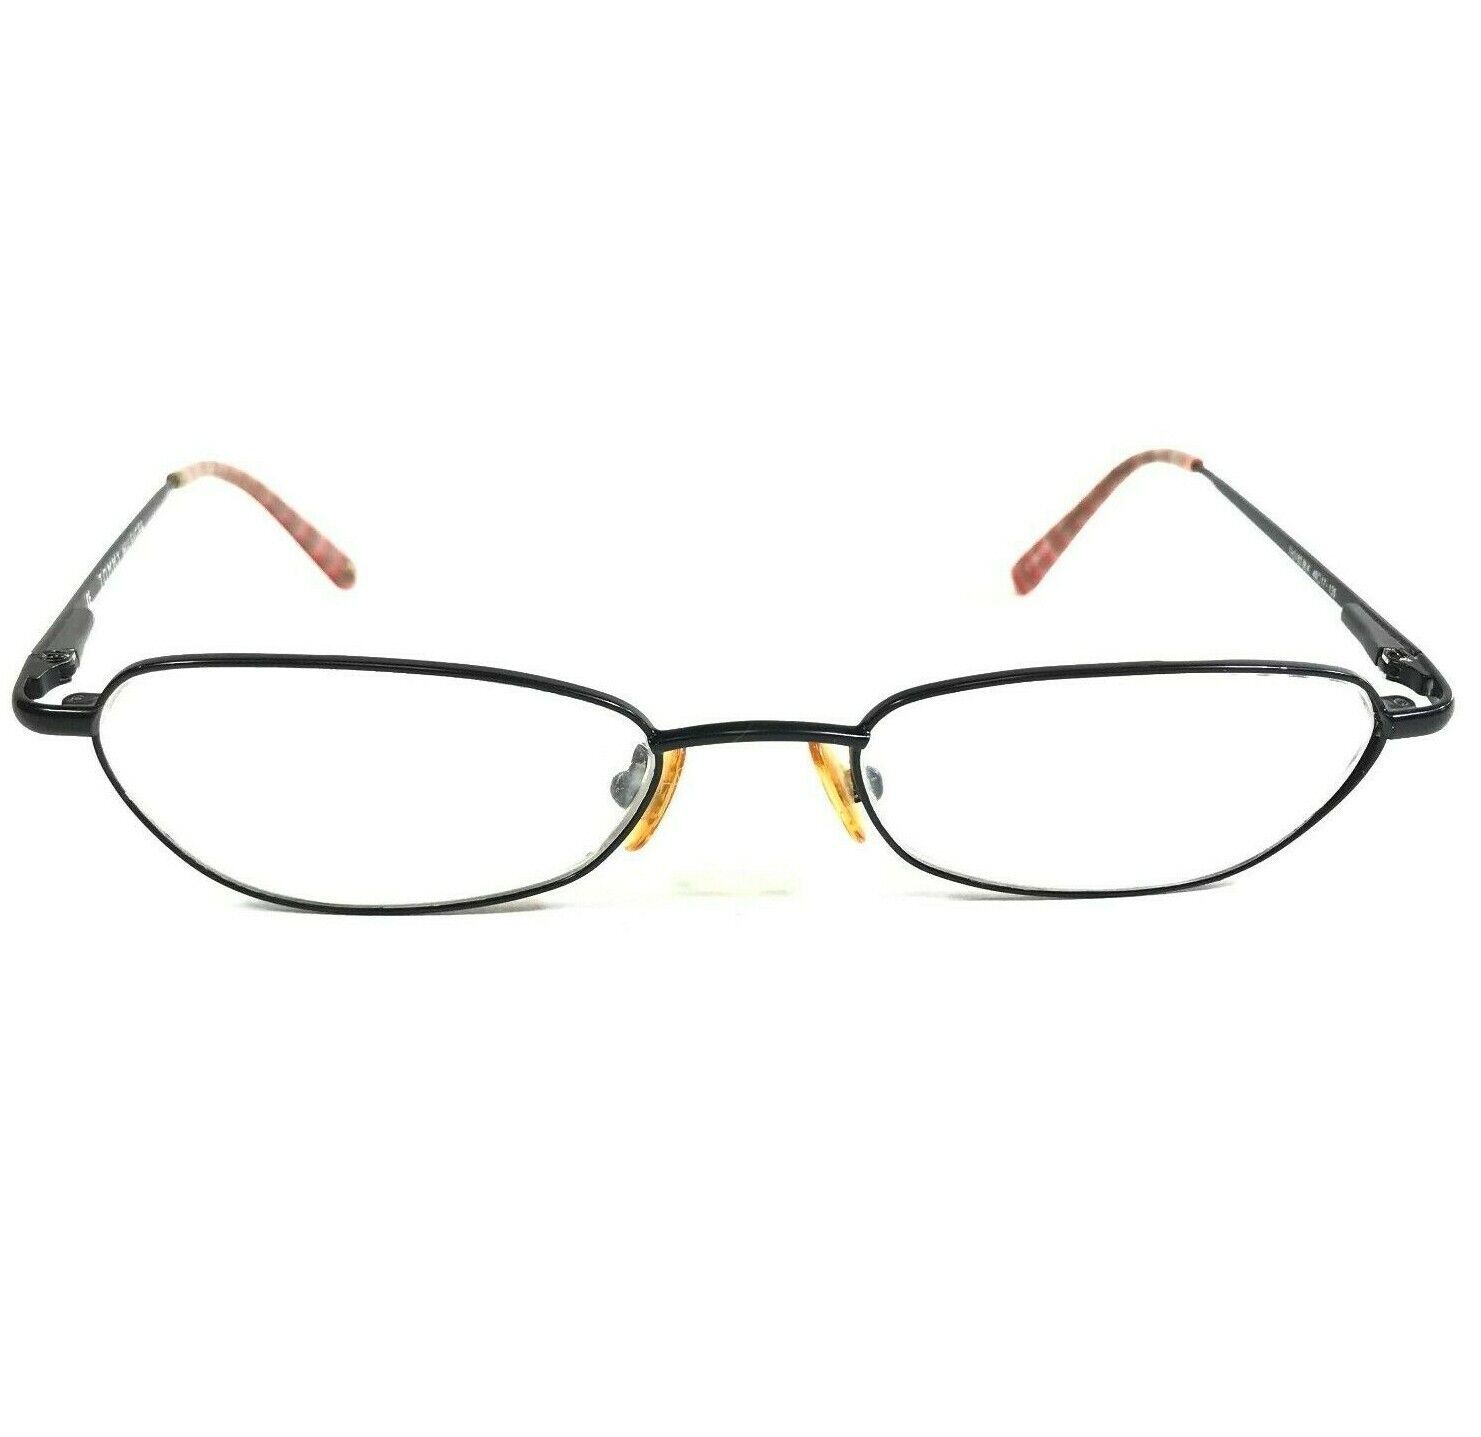 Primary image for Tommy Hilfiger Eyeglasses Frames TH3183 BLK Oval Thin Wire Rim 49-17-135